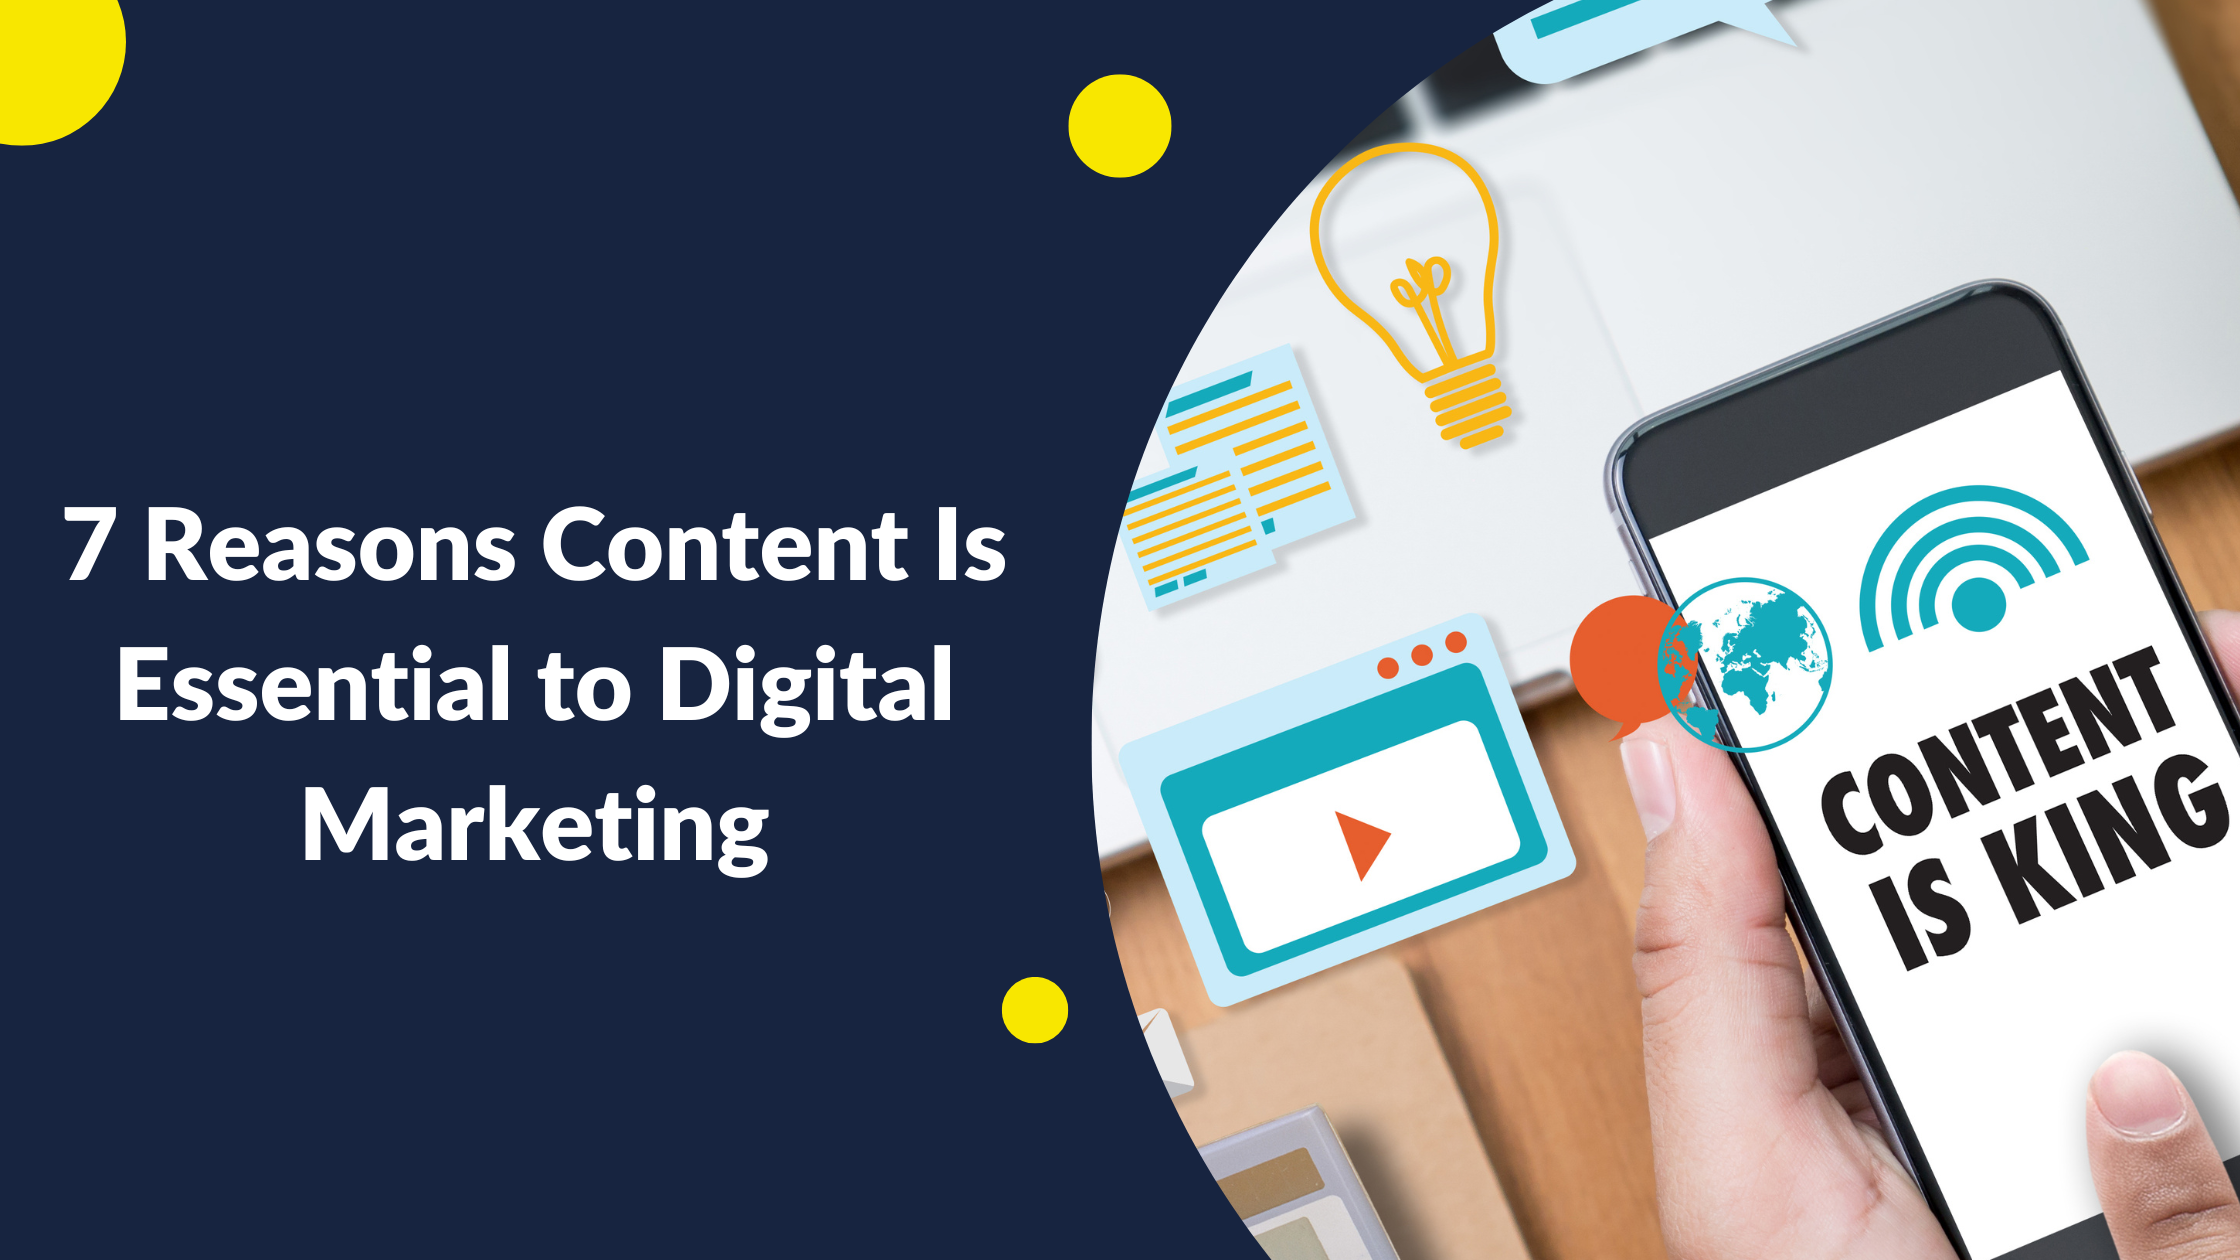 7 Reasons Content Is Essential to Digital Marketing